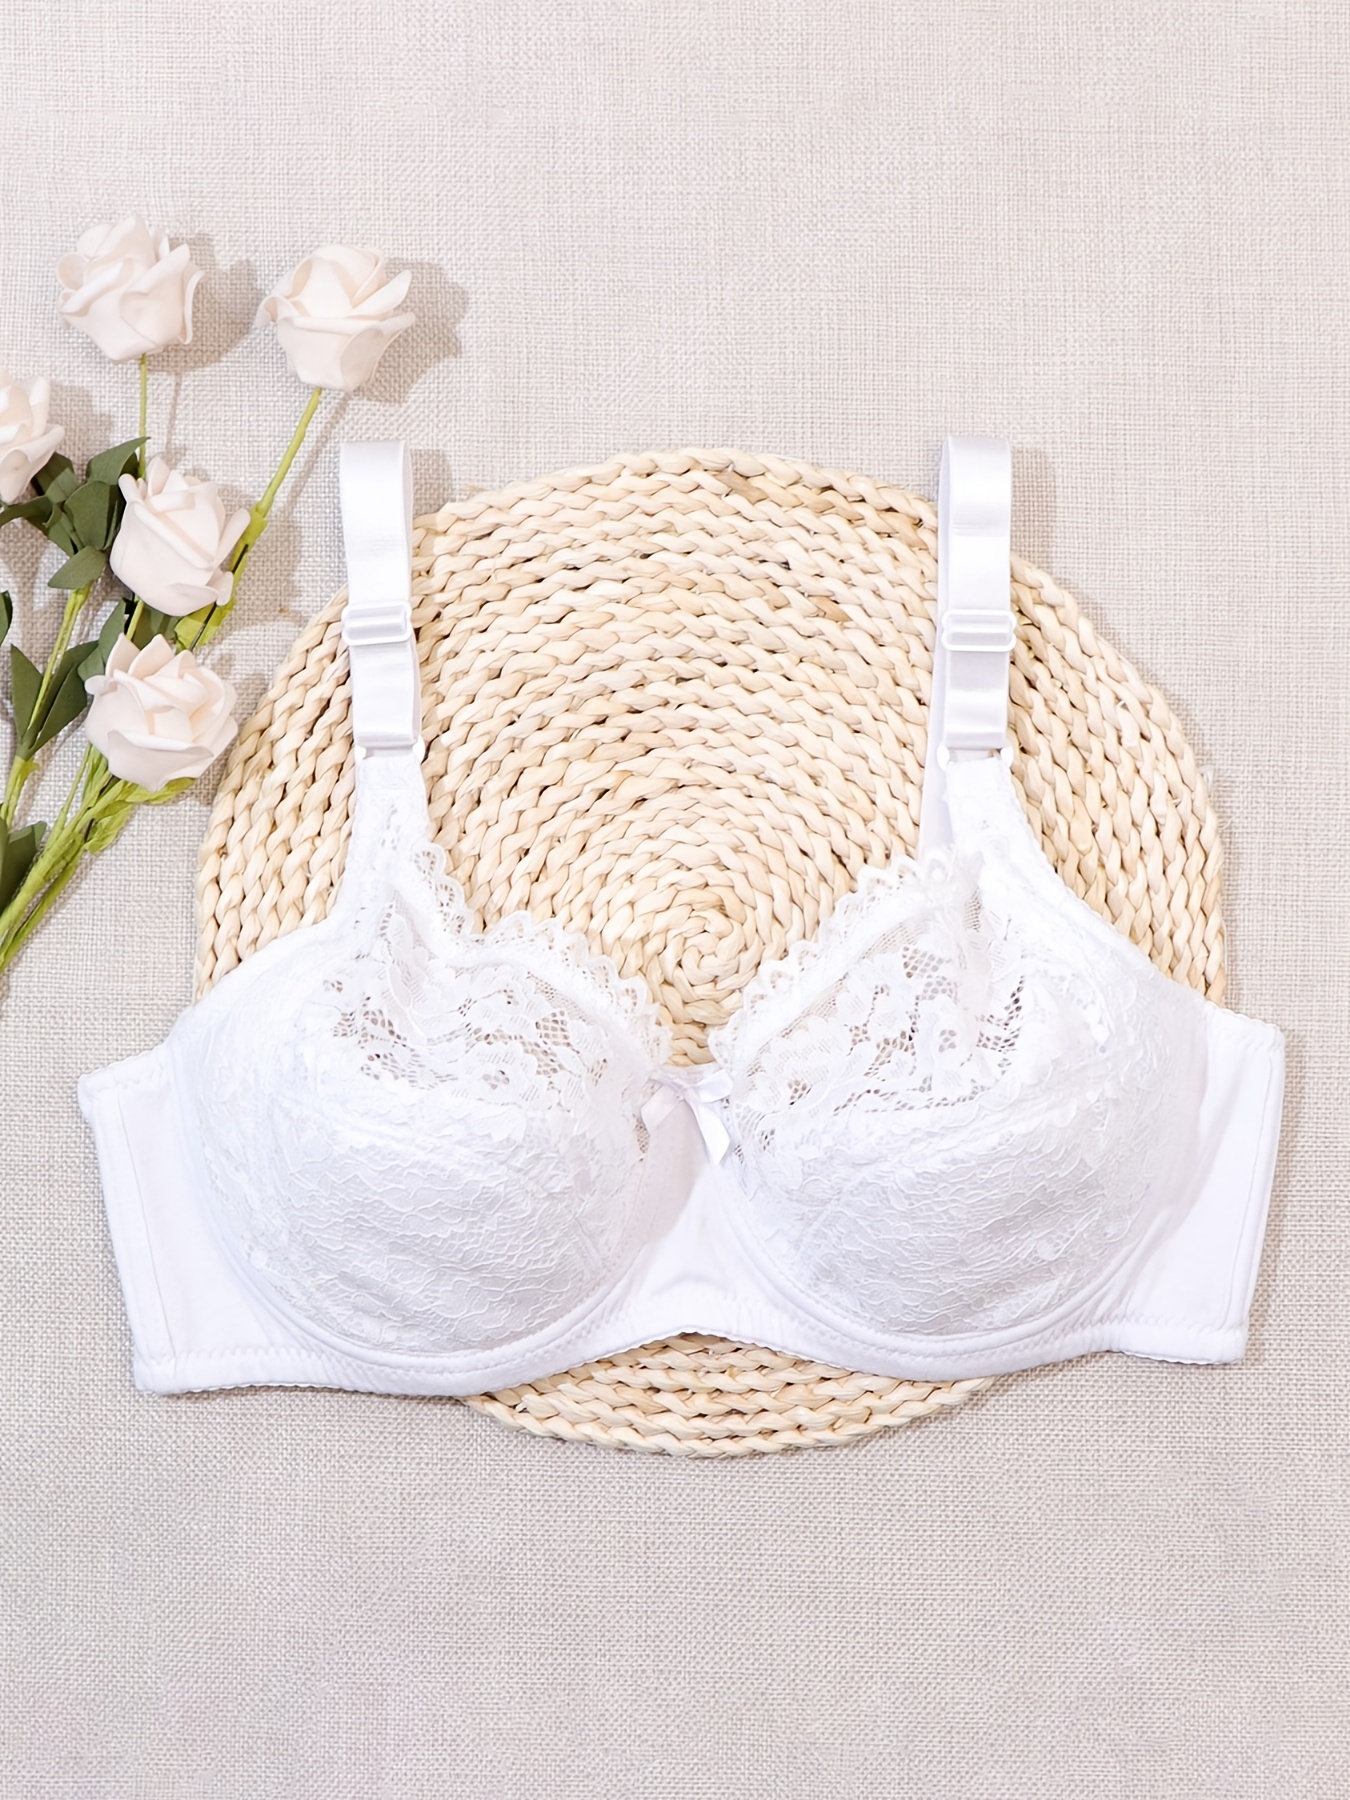 Plus Size White Lace A Push Up Bra With Embroidery Support Sexy